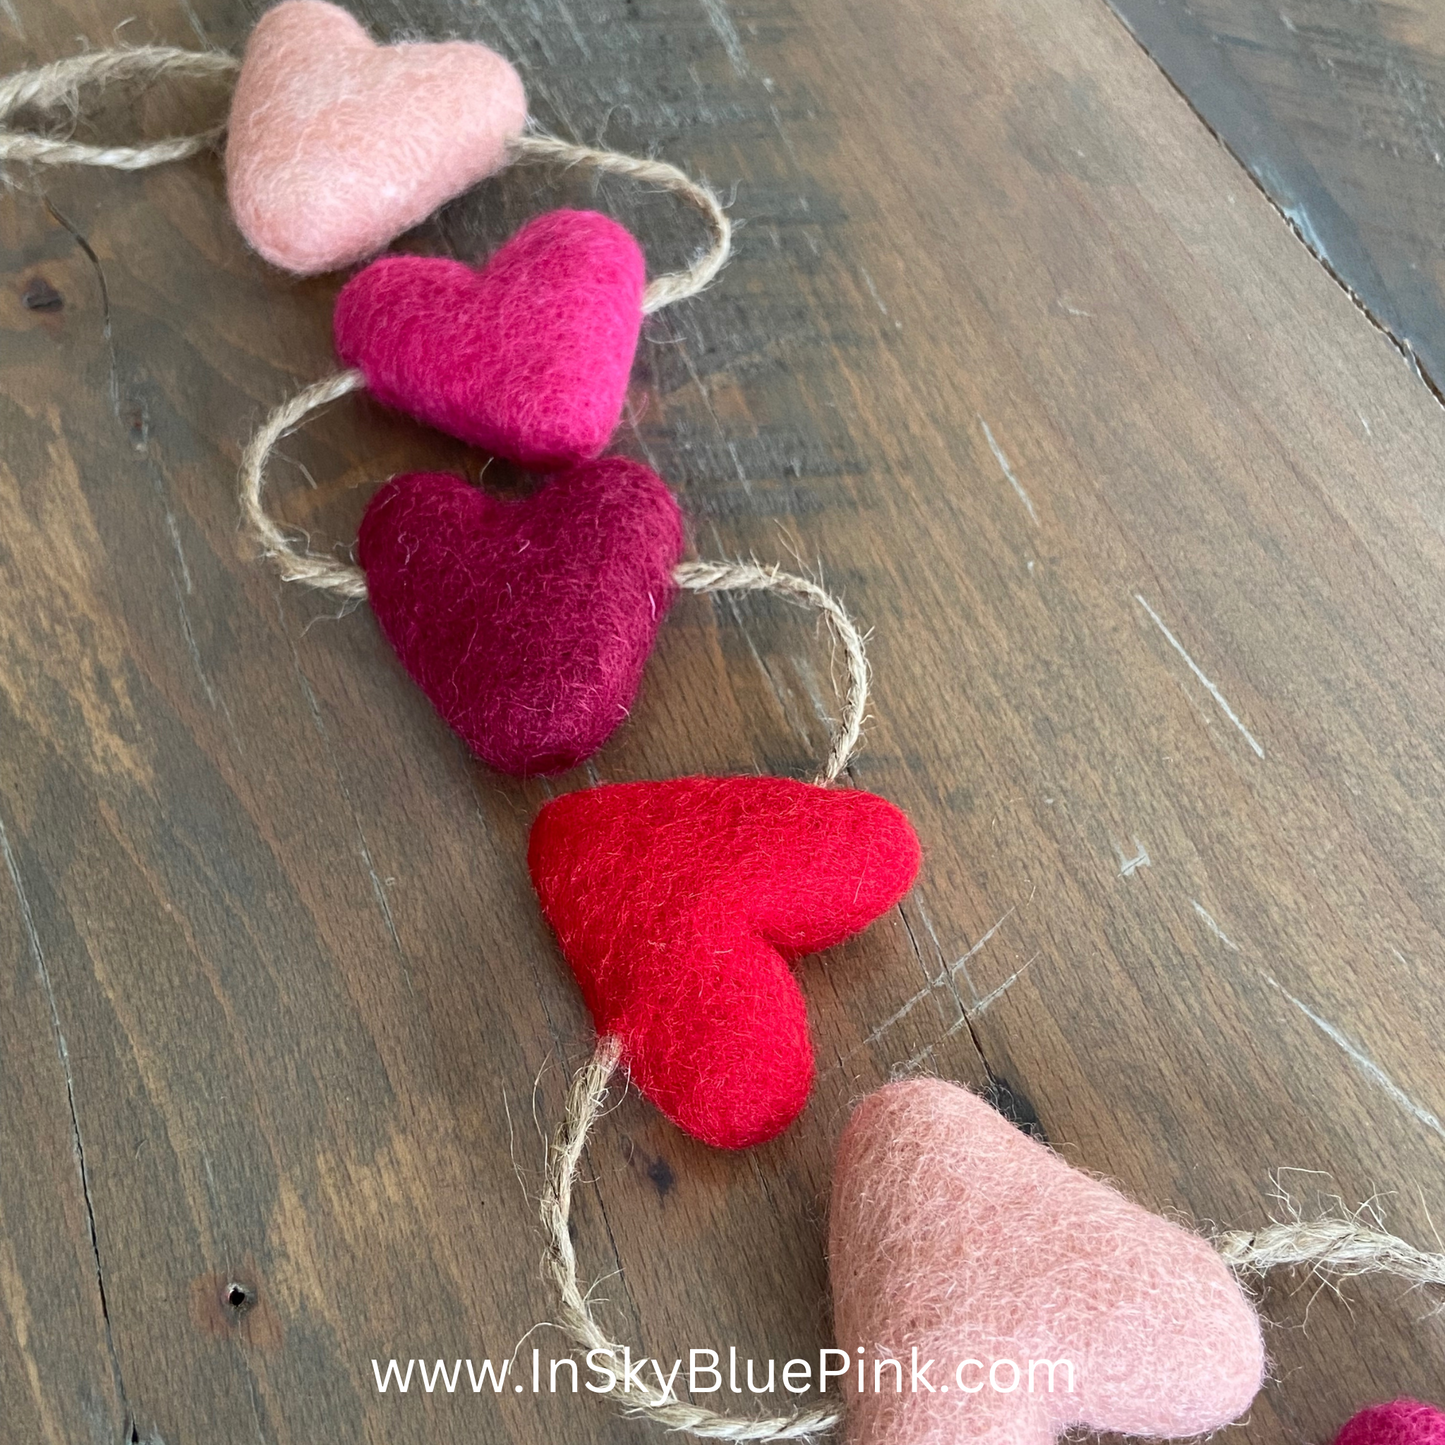 Shades of Pink Felted Wool Hearts Garland-4-foot Valentine Day Decor